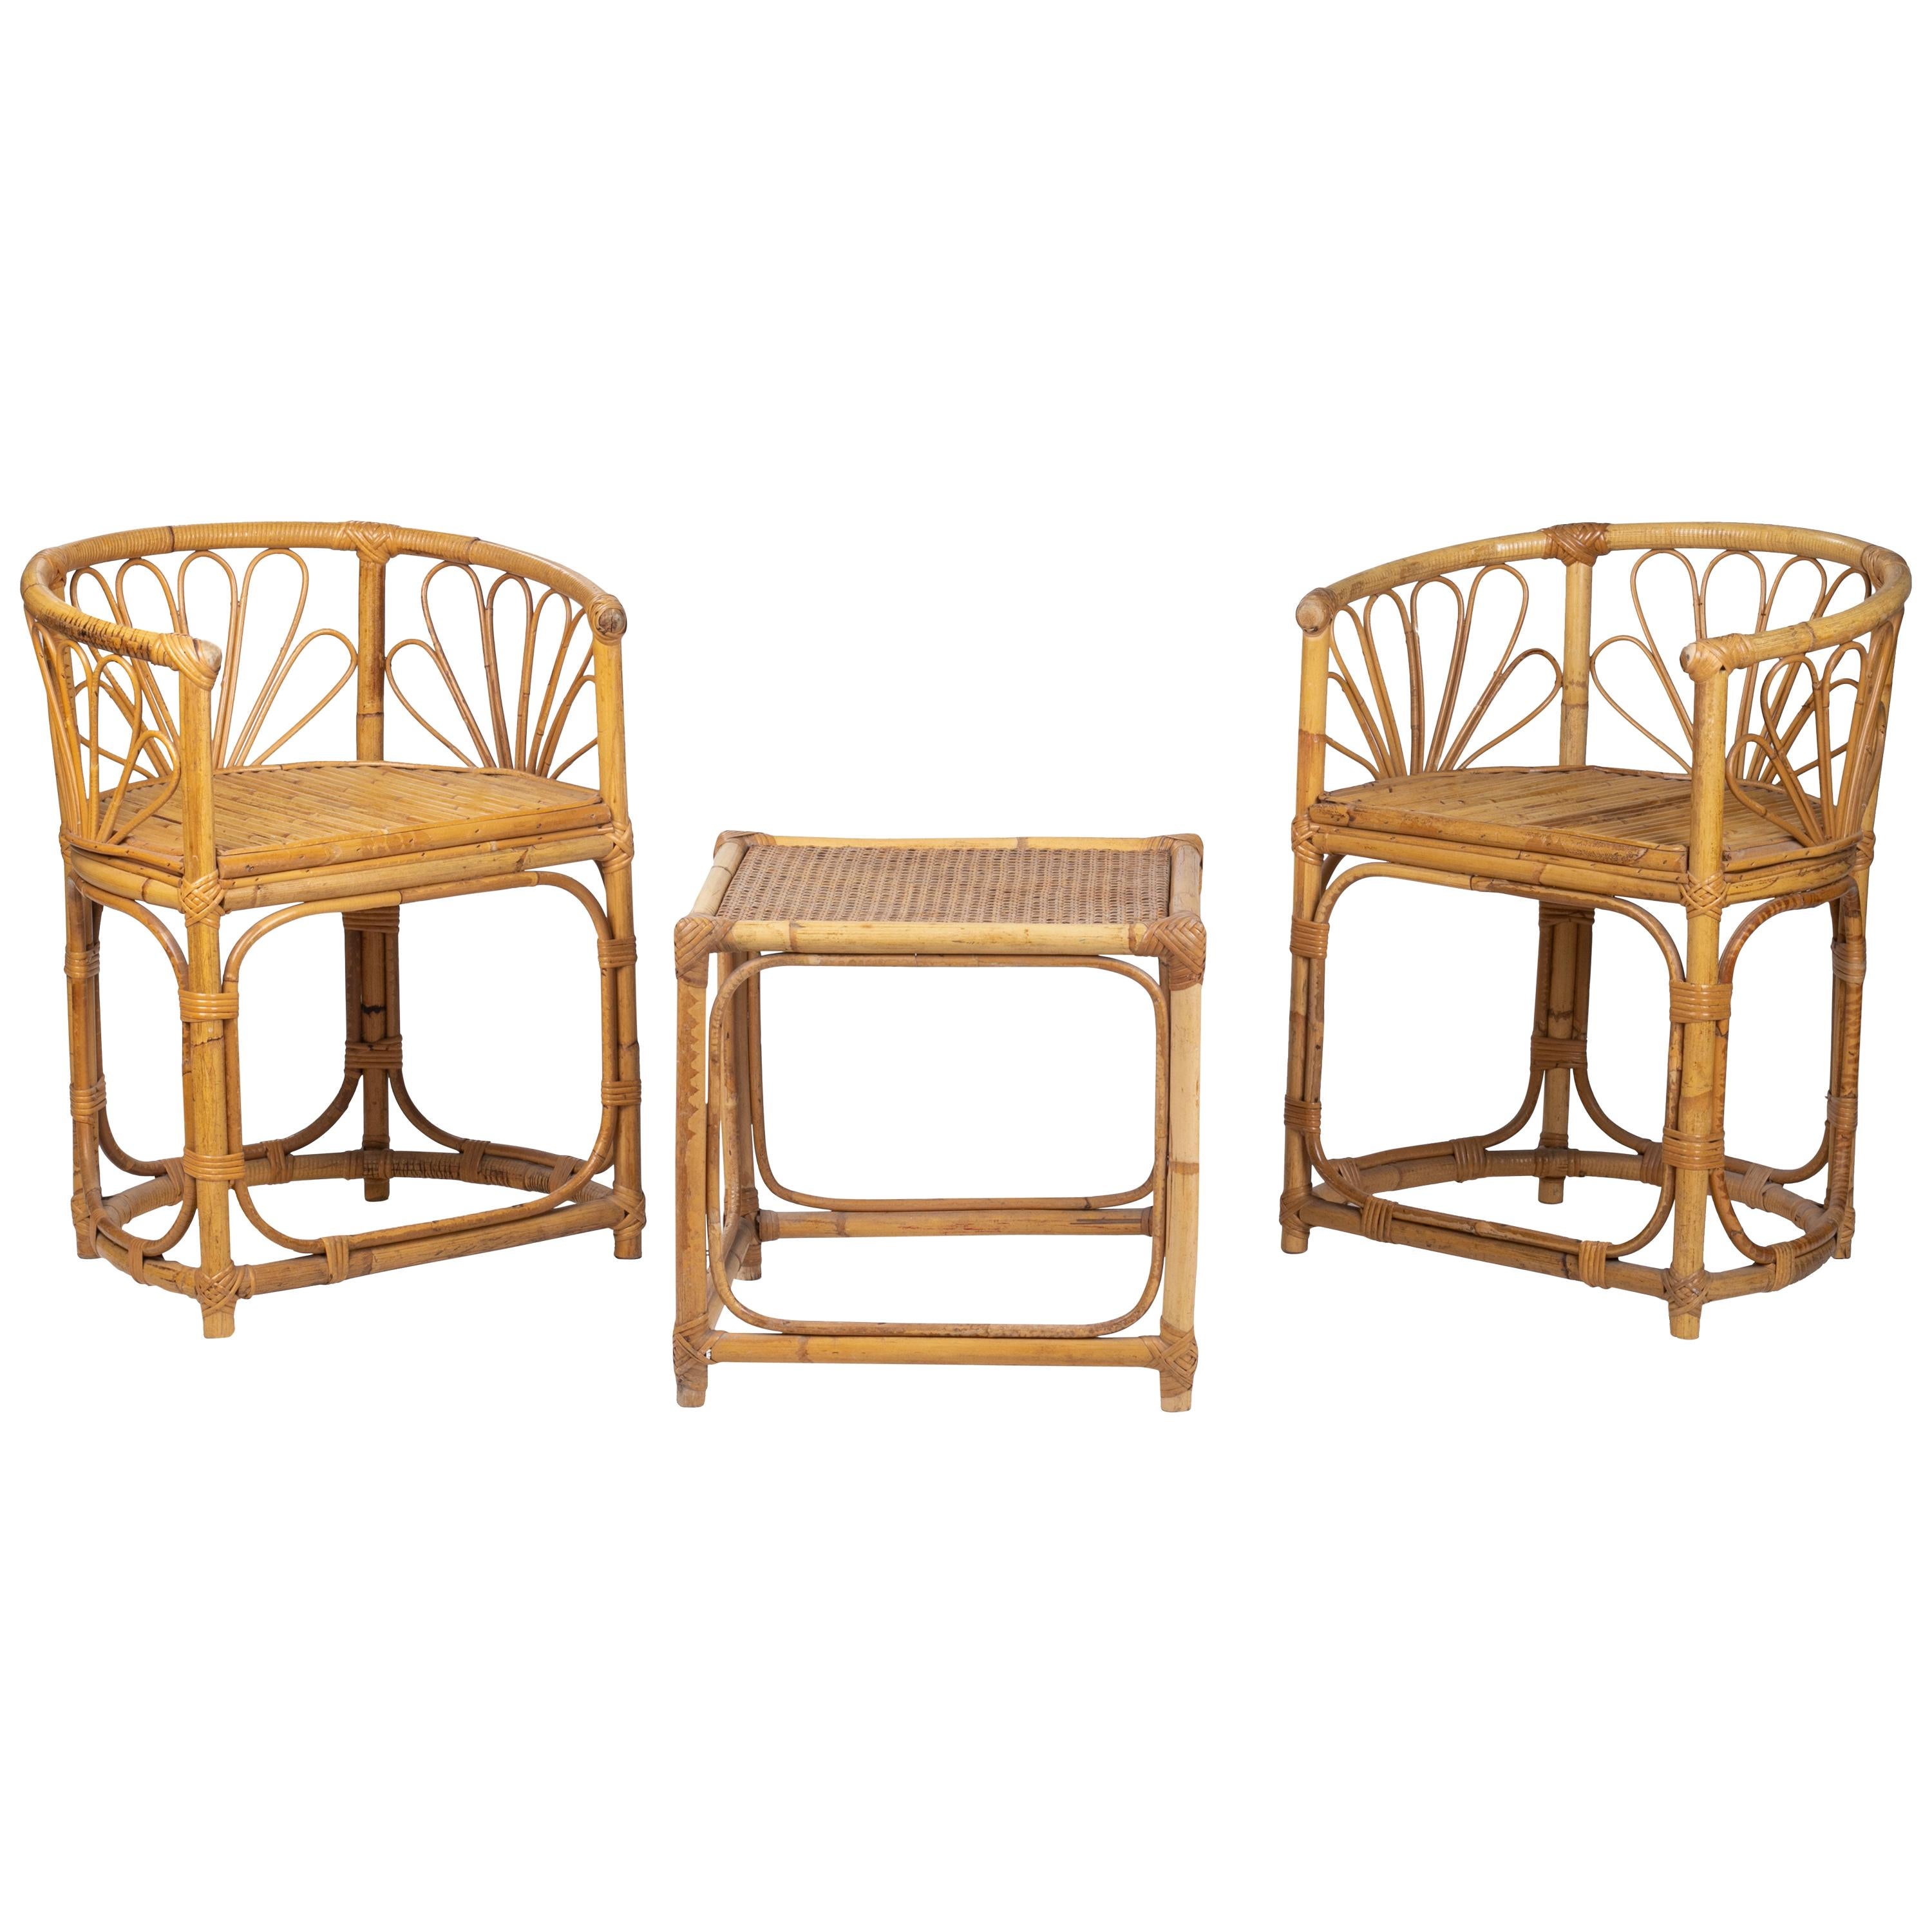 1980s Spanish Bamboo Set Consisting of a Table and Two Armchairs